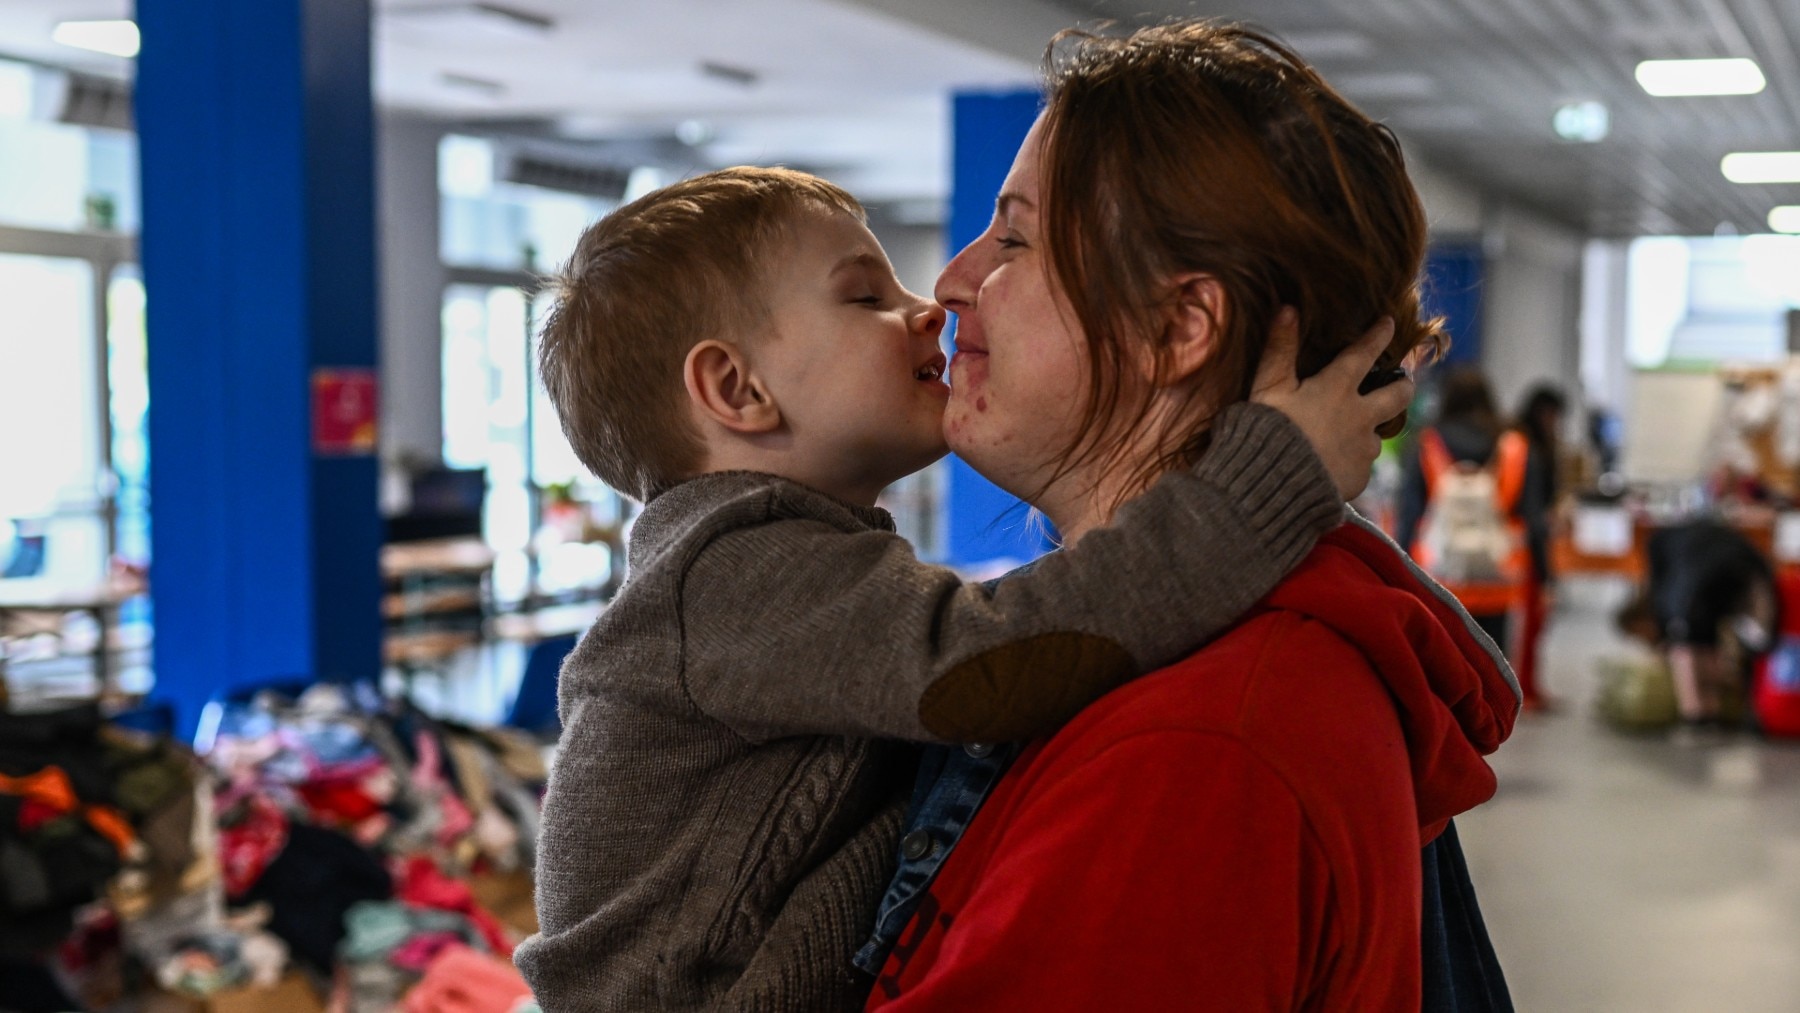 A woman who fled the war in Ukraine comforts a child inside a sports hall that has been converted for a temporary shelter on Nowa Huta district, March 15, 2022.